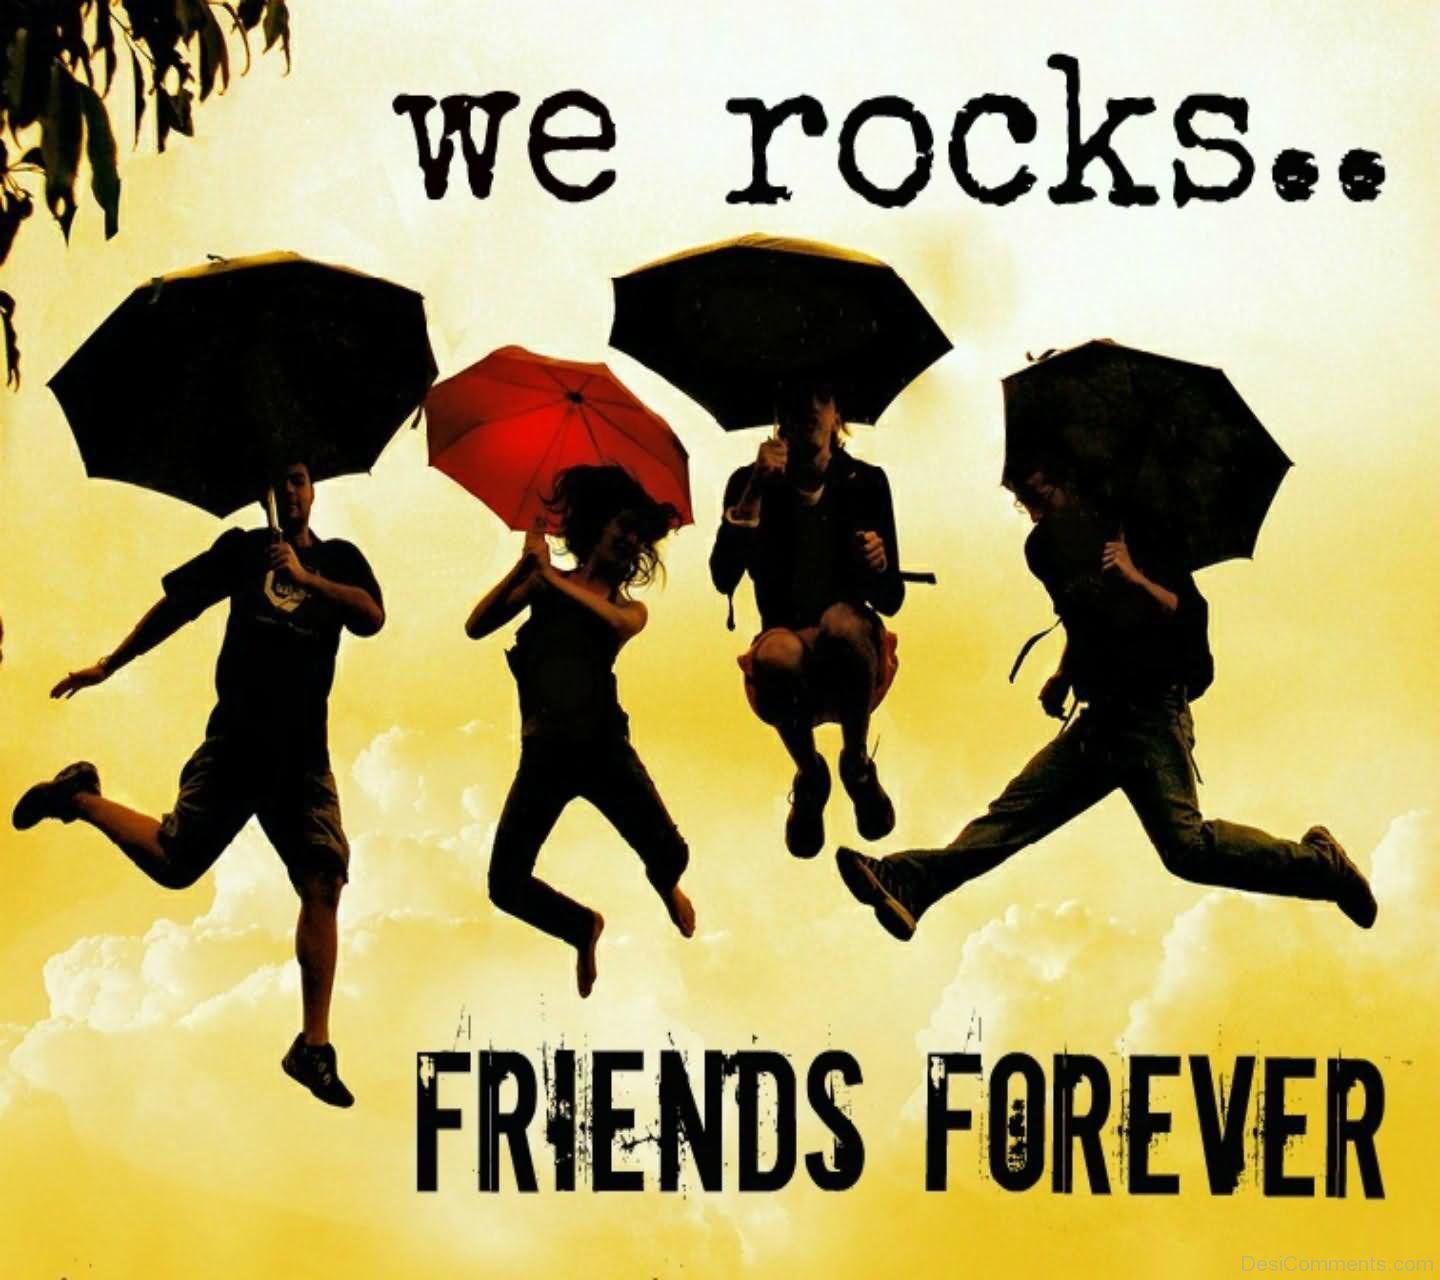 Friends Forever Wallpapers For Facebook - Wallpaper Cave